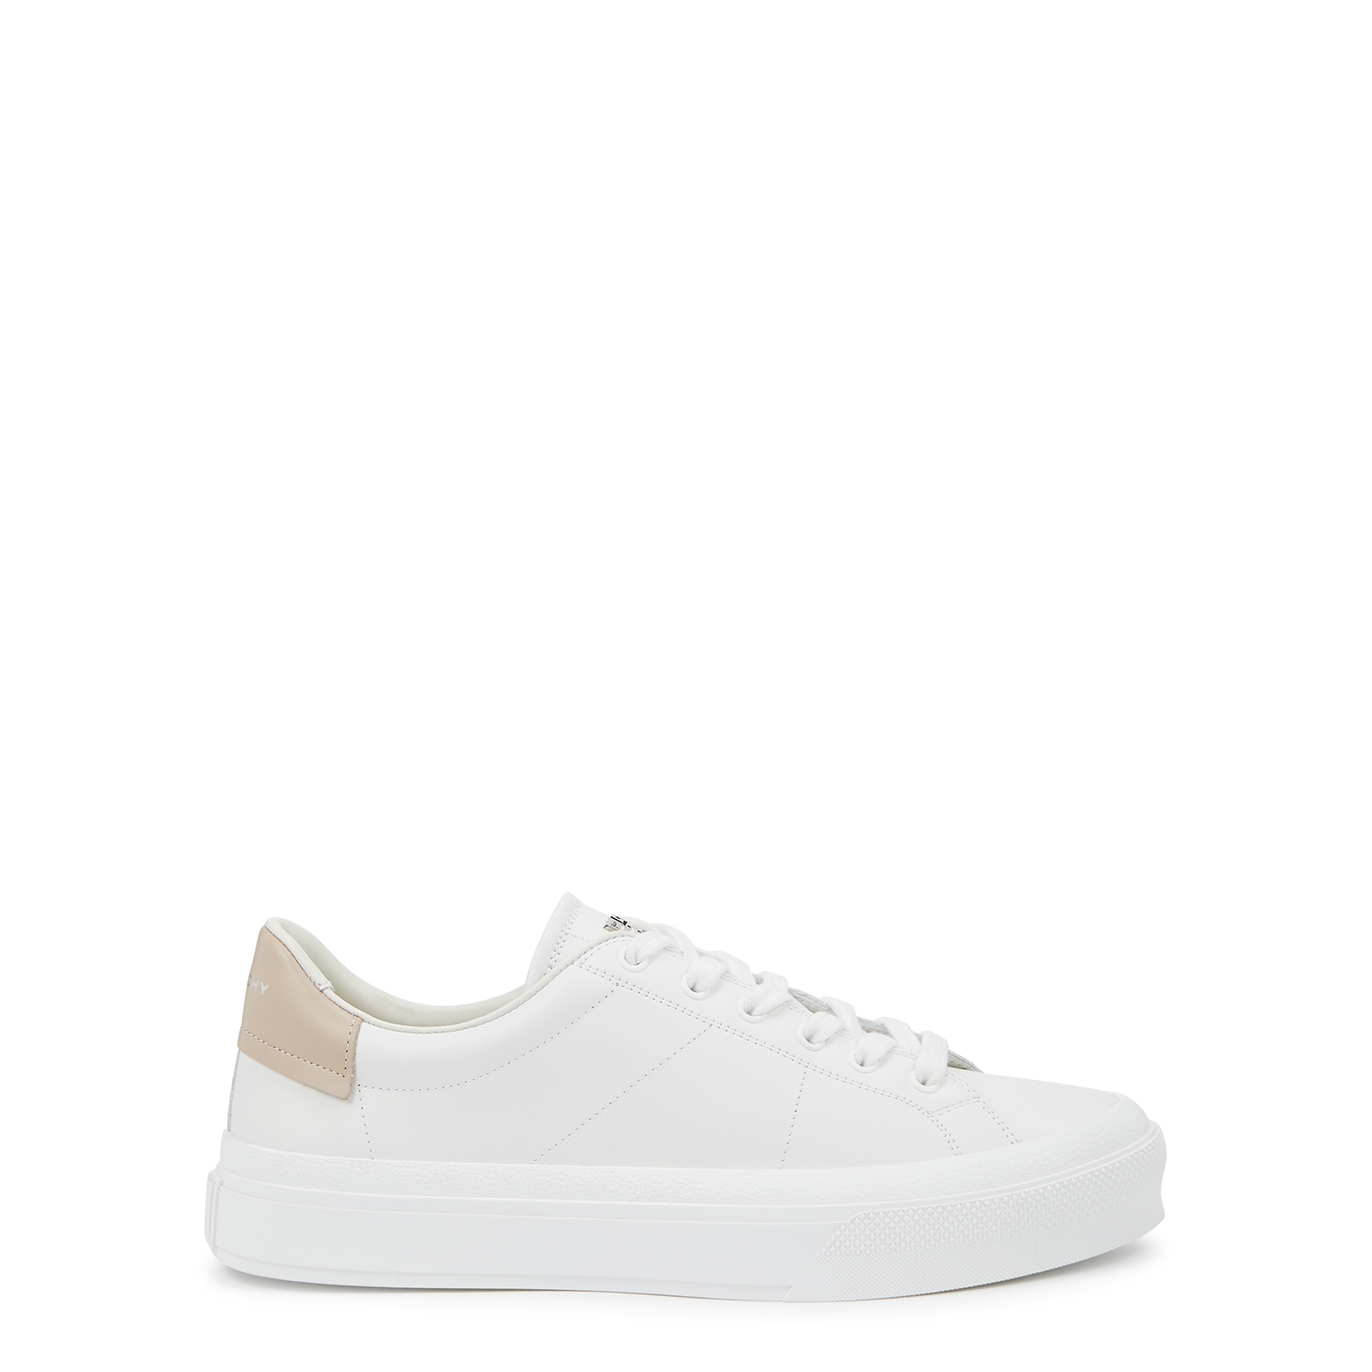 GIVENCHY CITY SPORT LEATHER trainers